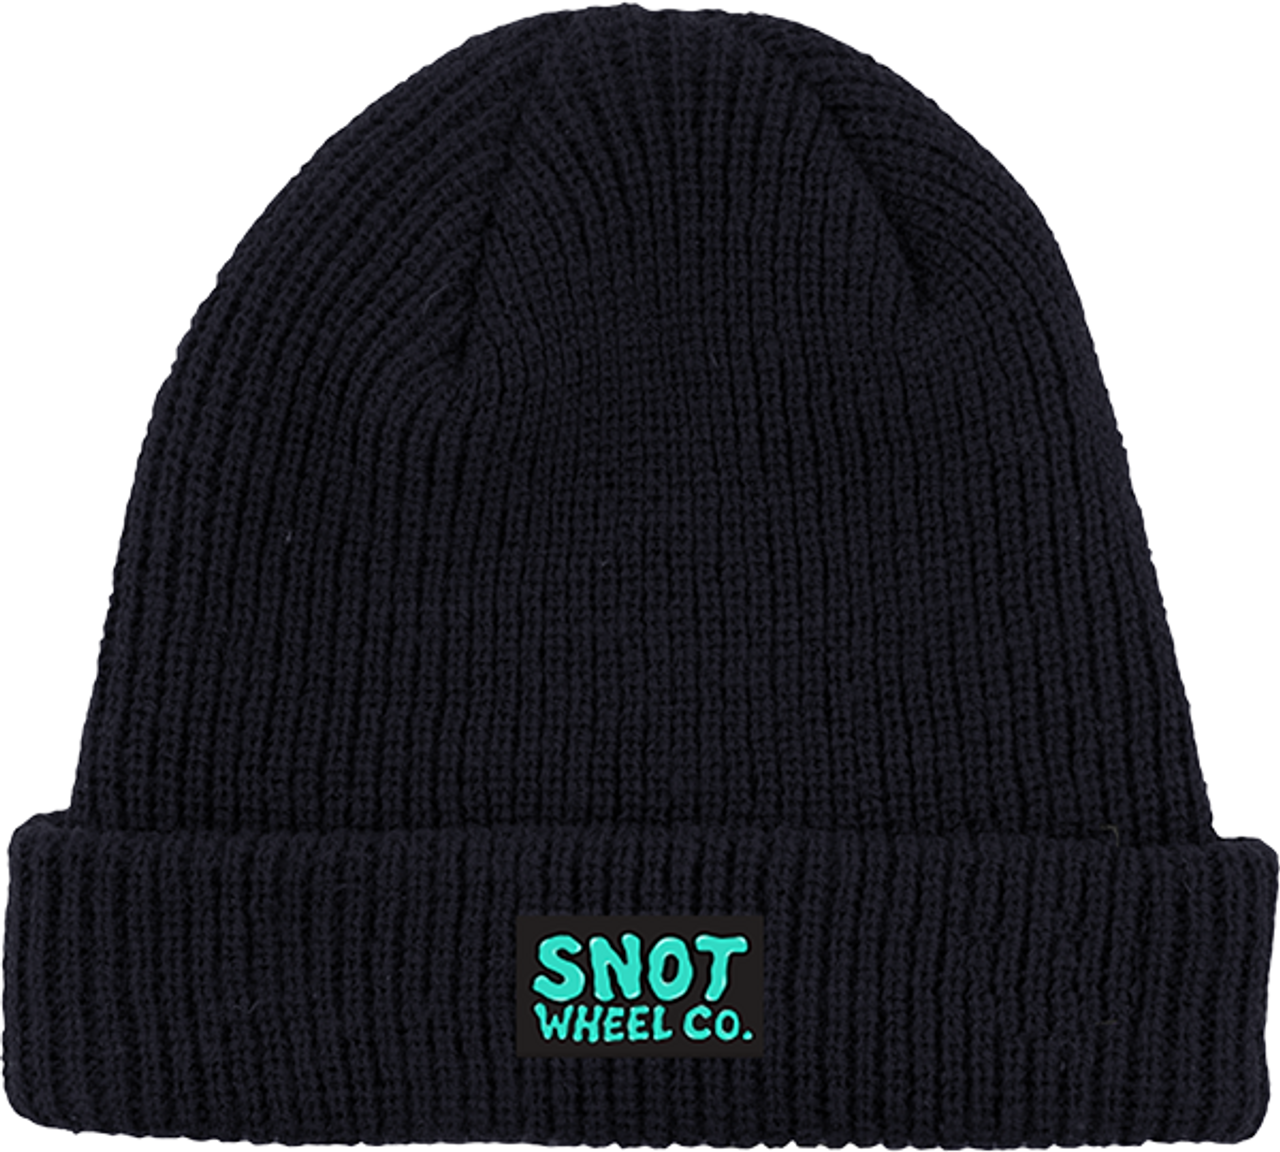 SNOT LABEL BEANIE BLK/TEAL